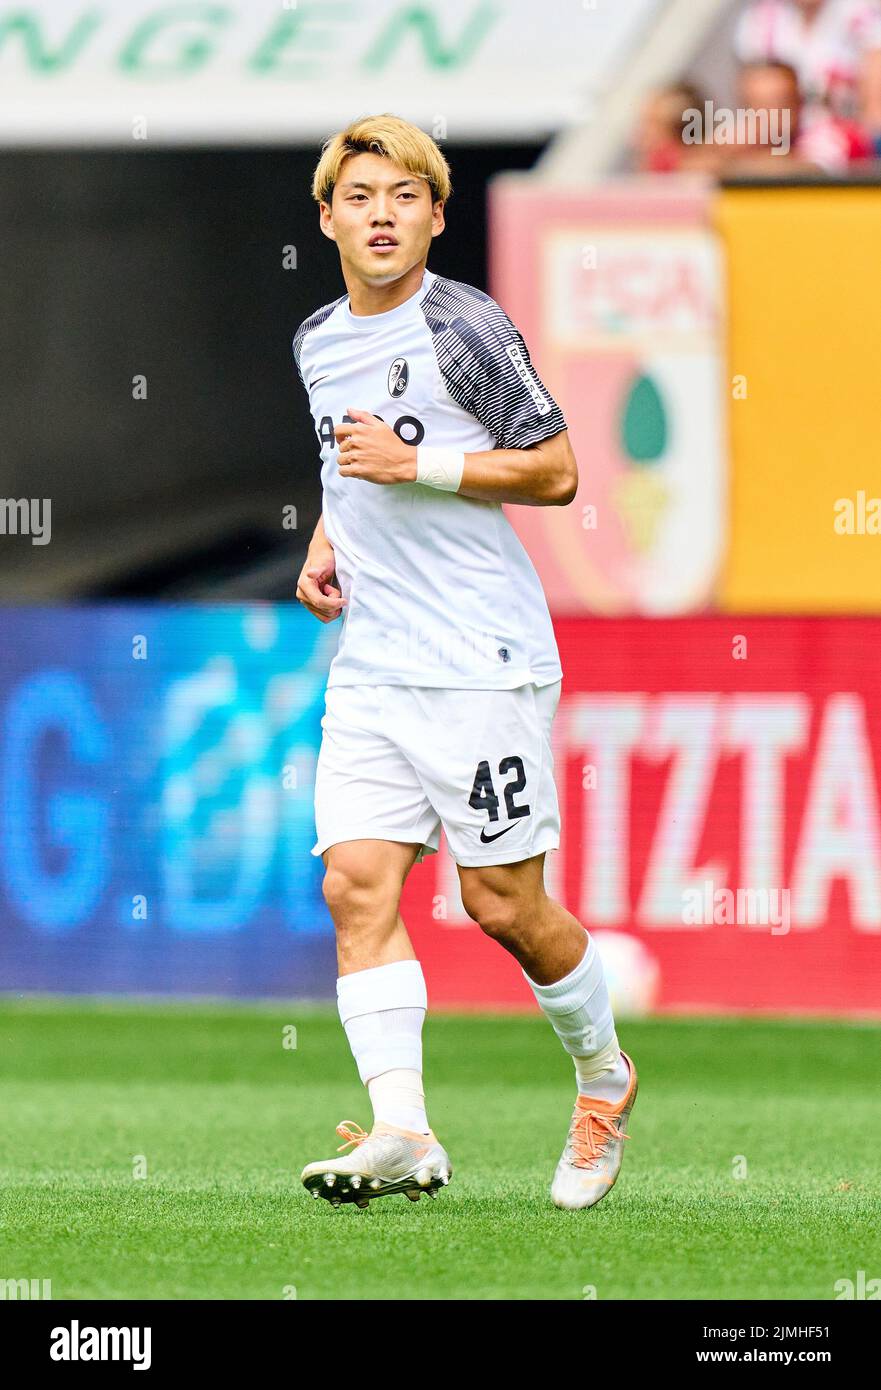 Ritsu Doan, FRG 42  in the match FC AUGSBURG - SC FREIBURG 0-4 1.German Football League on Aug 06, 2022 in Augsburg, Germany. Season 2022/2023, matchday 1, 1.Bundesliga, FCB, Munich, 1.Spieltag © Peter Schatz / Alamy Live News    - DFL REGULATIONS PROHIBIT ANY USE OF PHOTOGRAPHS as IMAGE SEQUENCES and/or QUASI-VIDEO - Stock Photo